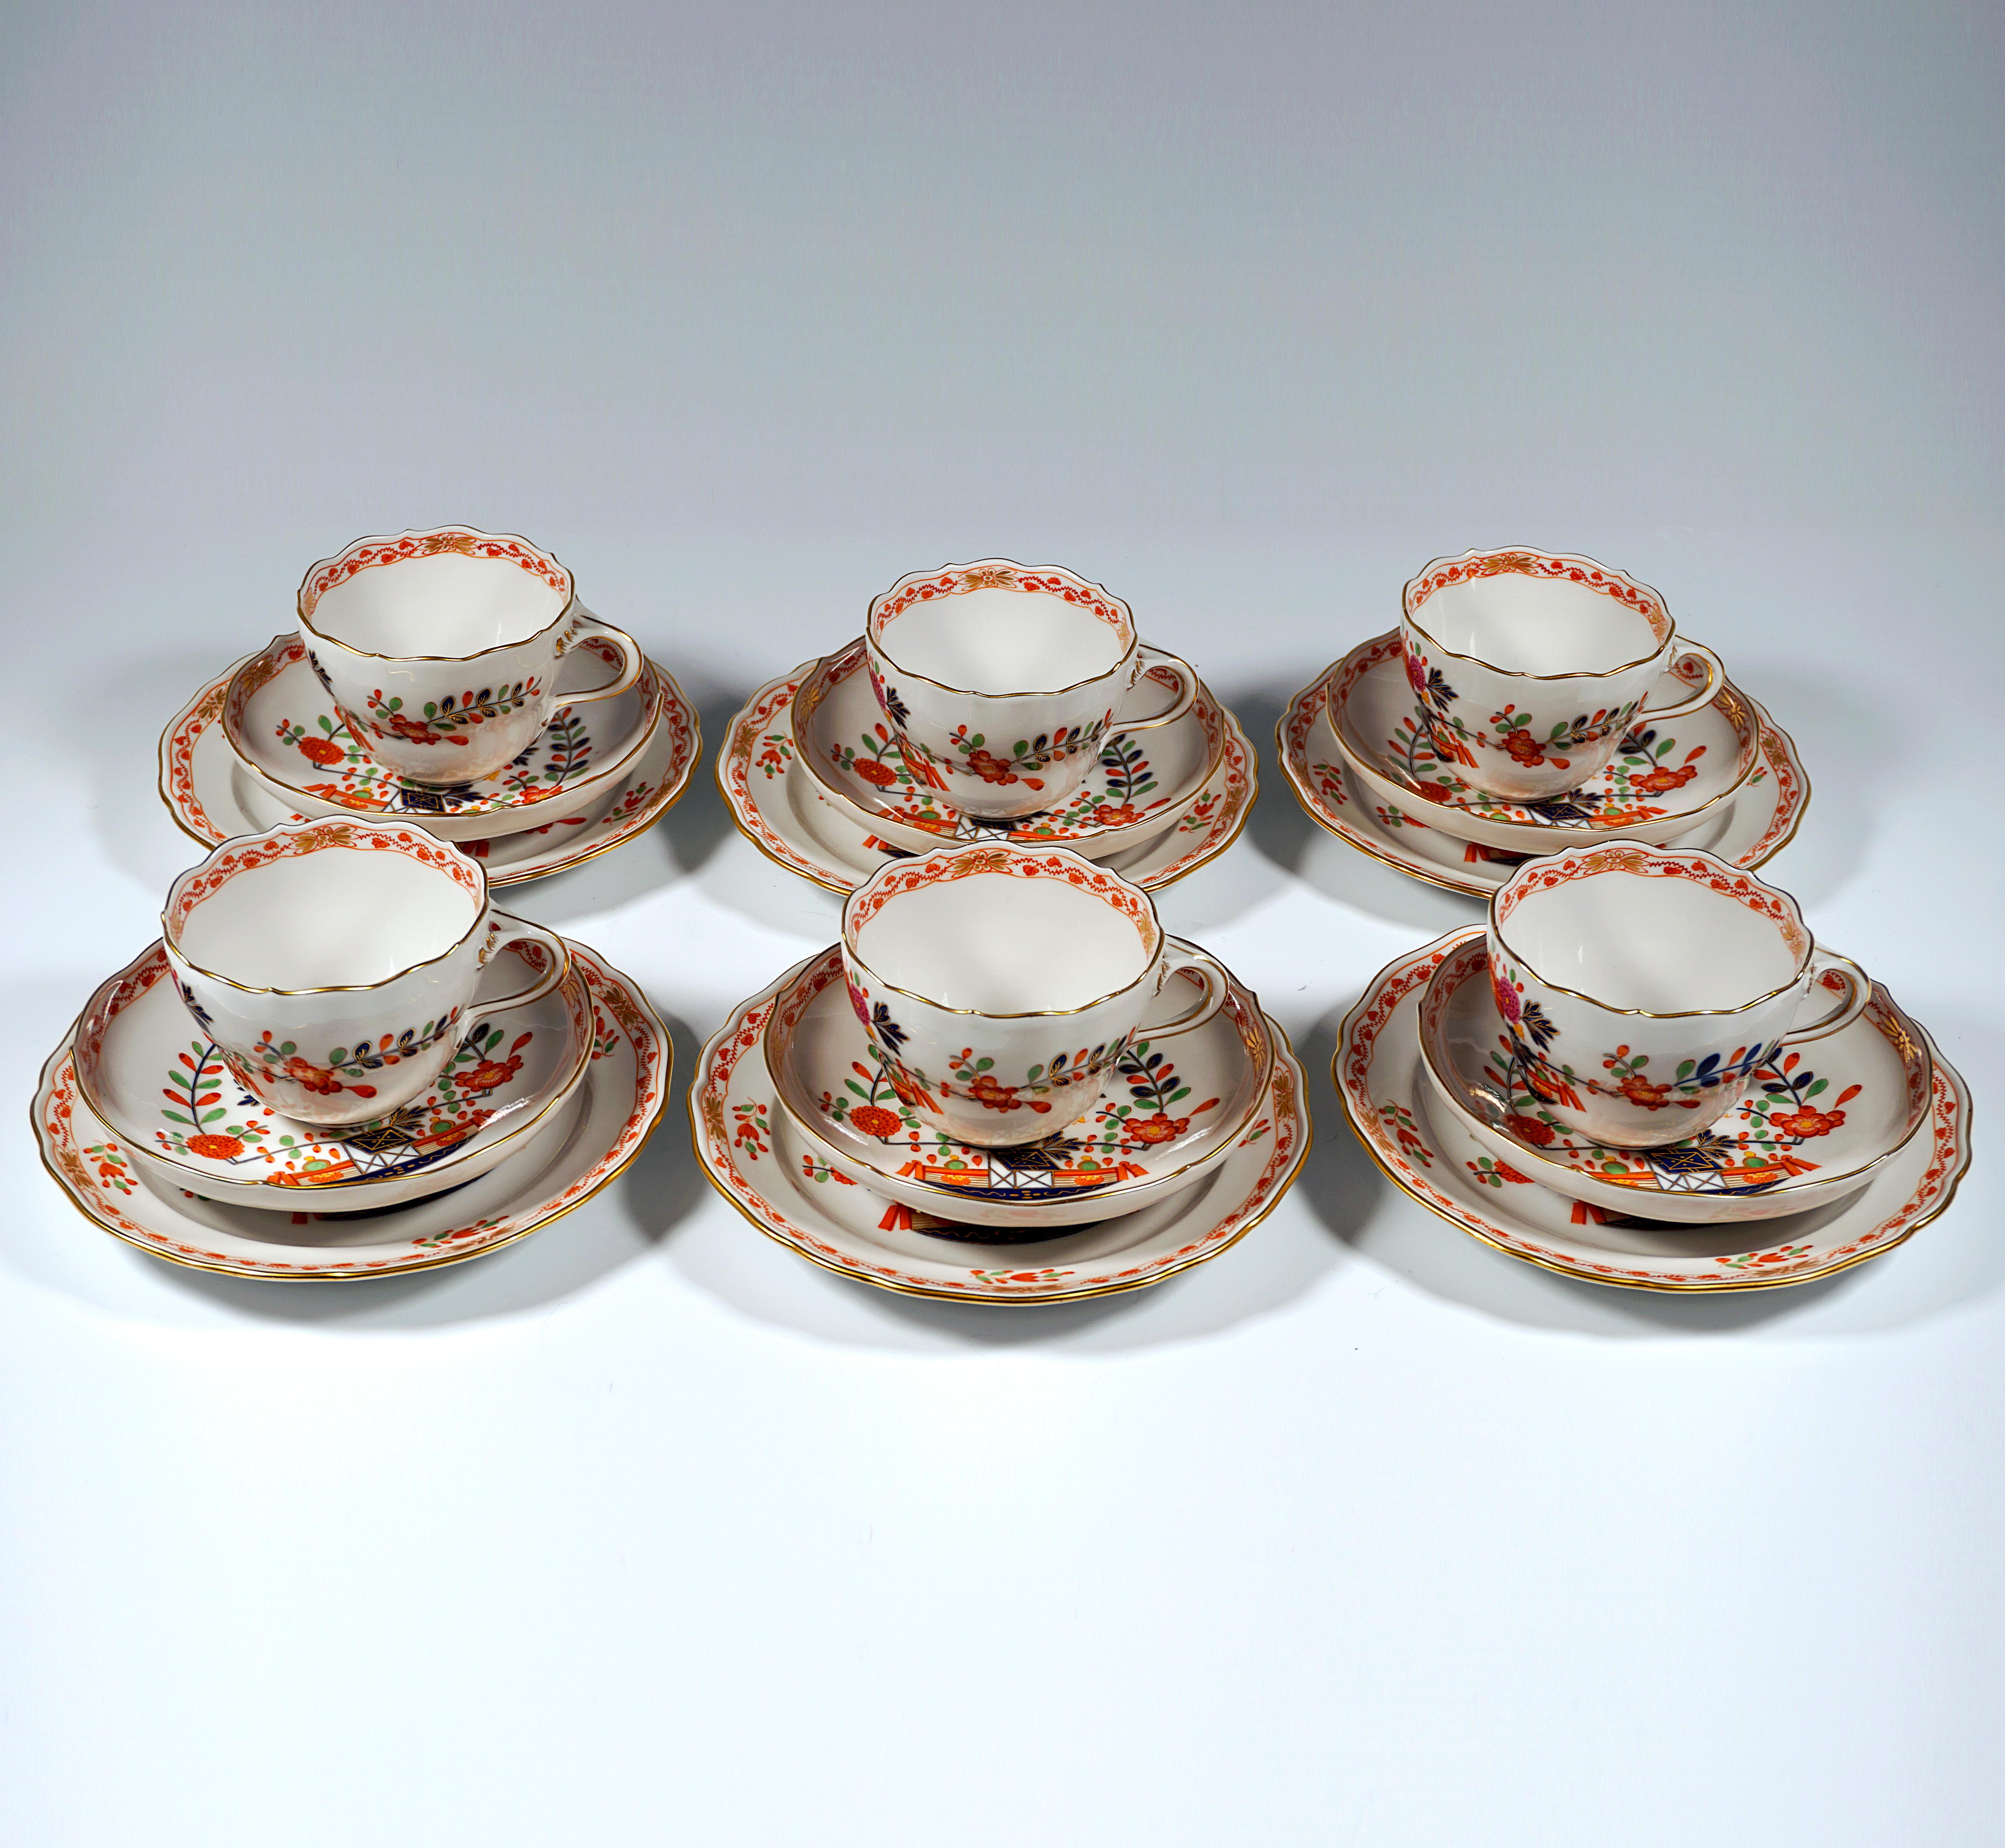 German Meissen Coffee & Tea Set For 6 People, Indian Flowers Coloured & Gold, 20th C.